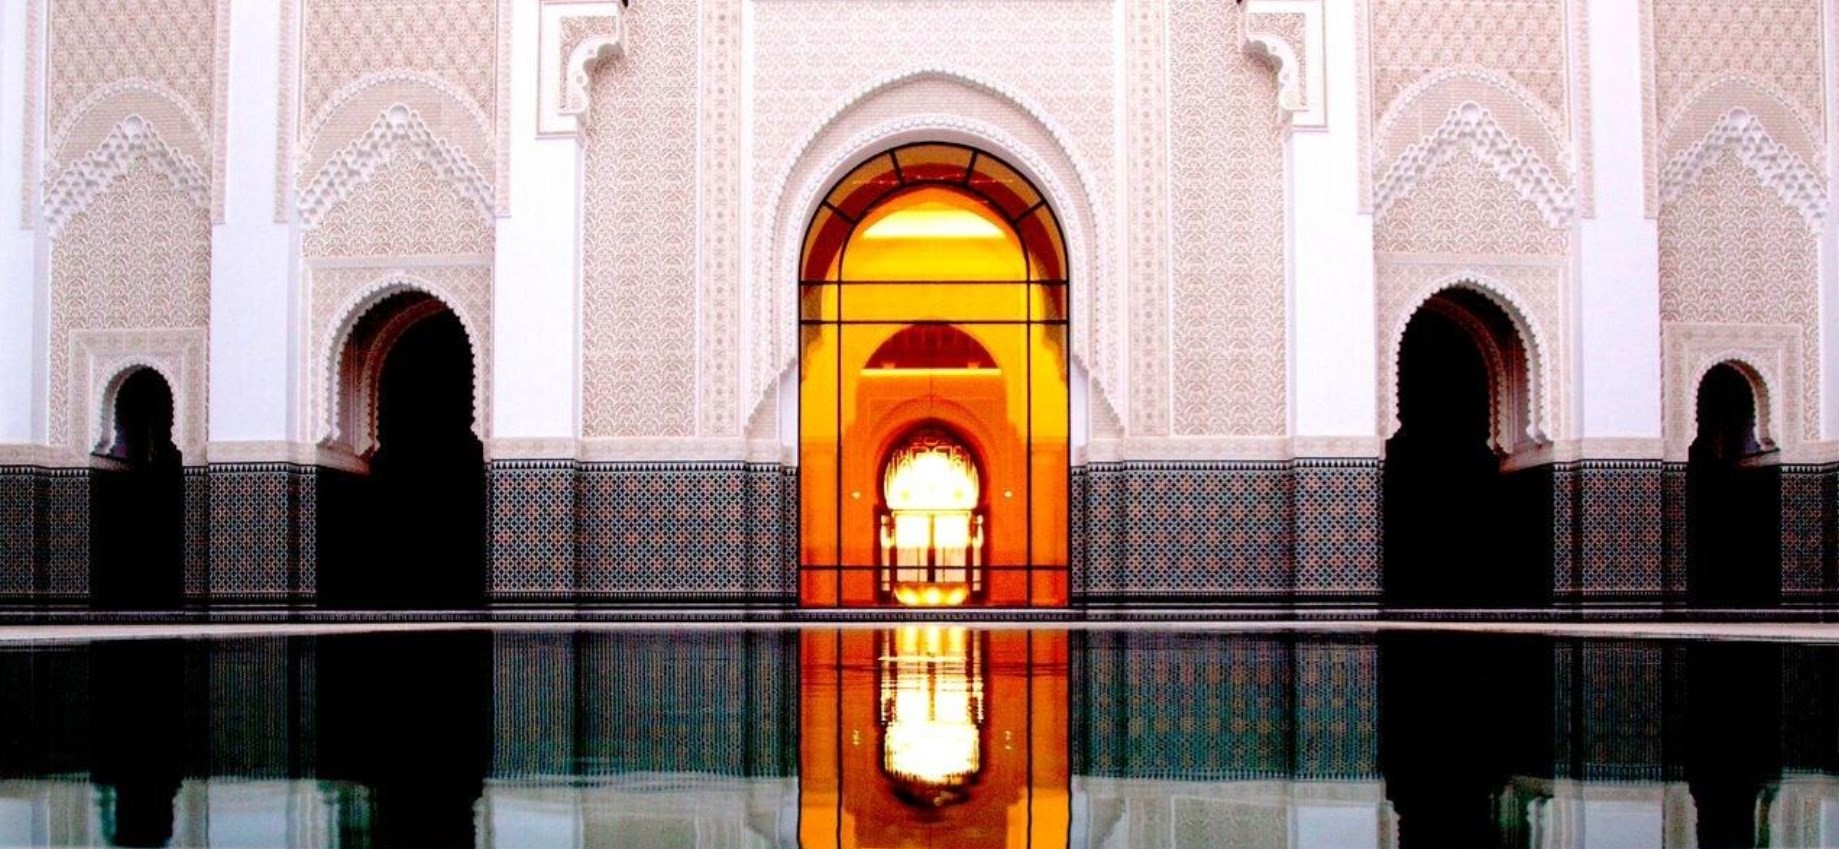 news-main-the-oberoi-group-will-open-a-hotel-in-marrakech-in-december.1568199053.jpg